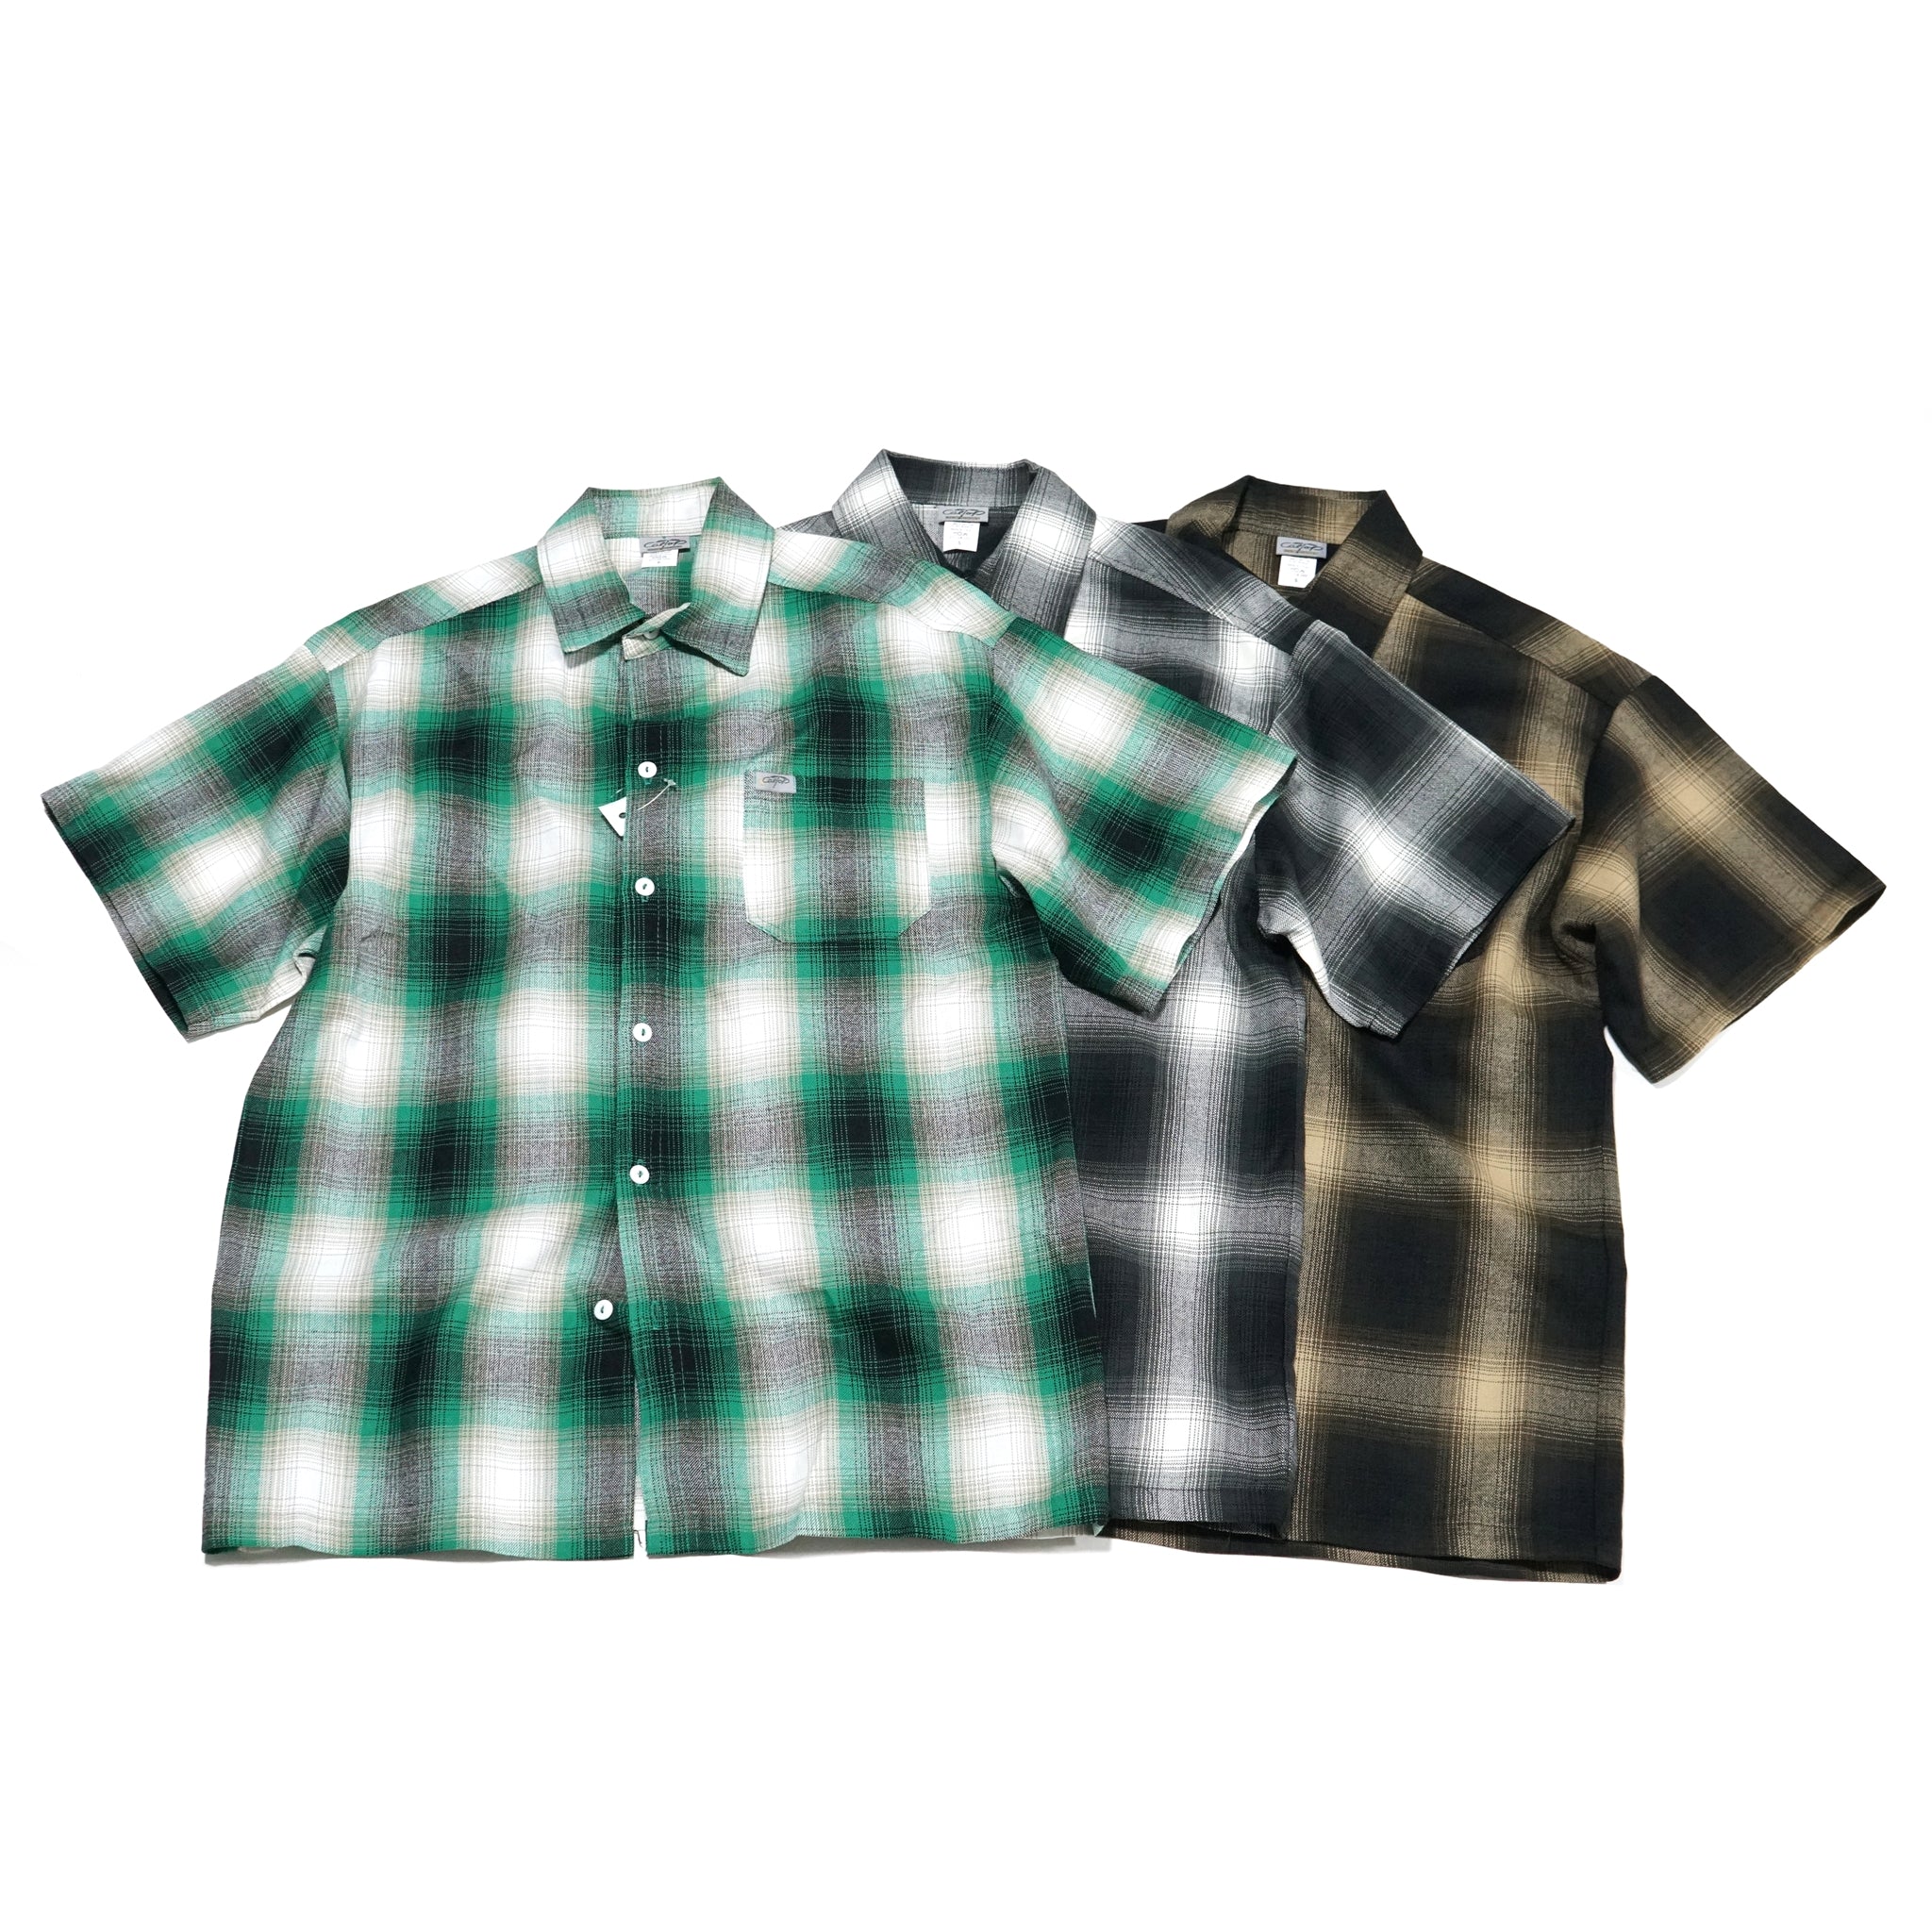 No:art-2000ss | Name:Ombrecheck ss | Color:Black/Ivory / Brown/Khaki / Green/White | Size:S/M/L【CALTOP_カルトップ】